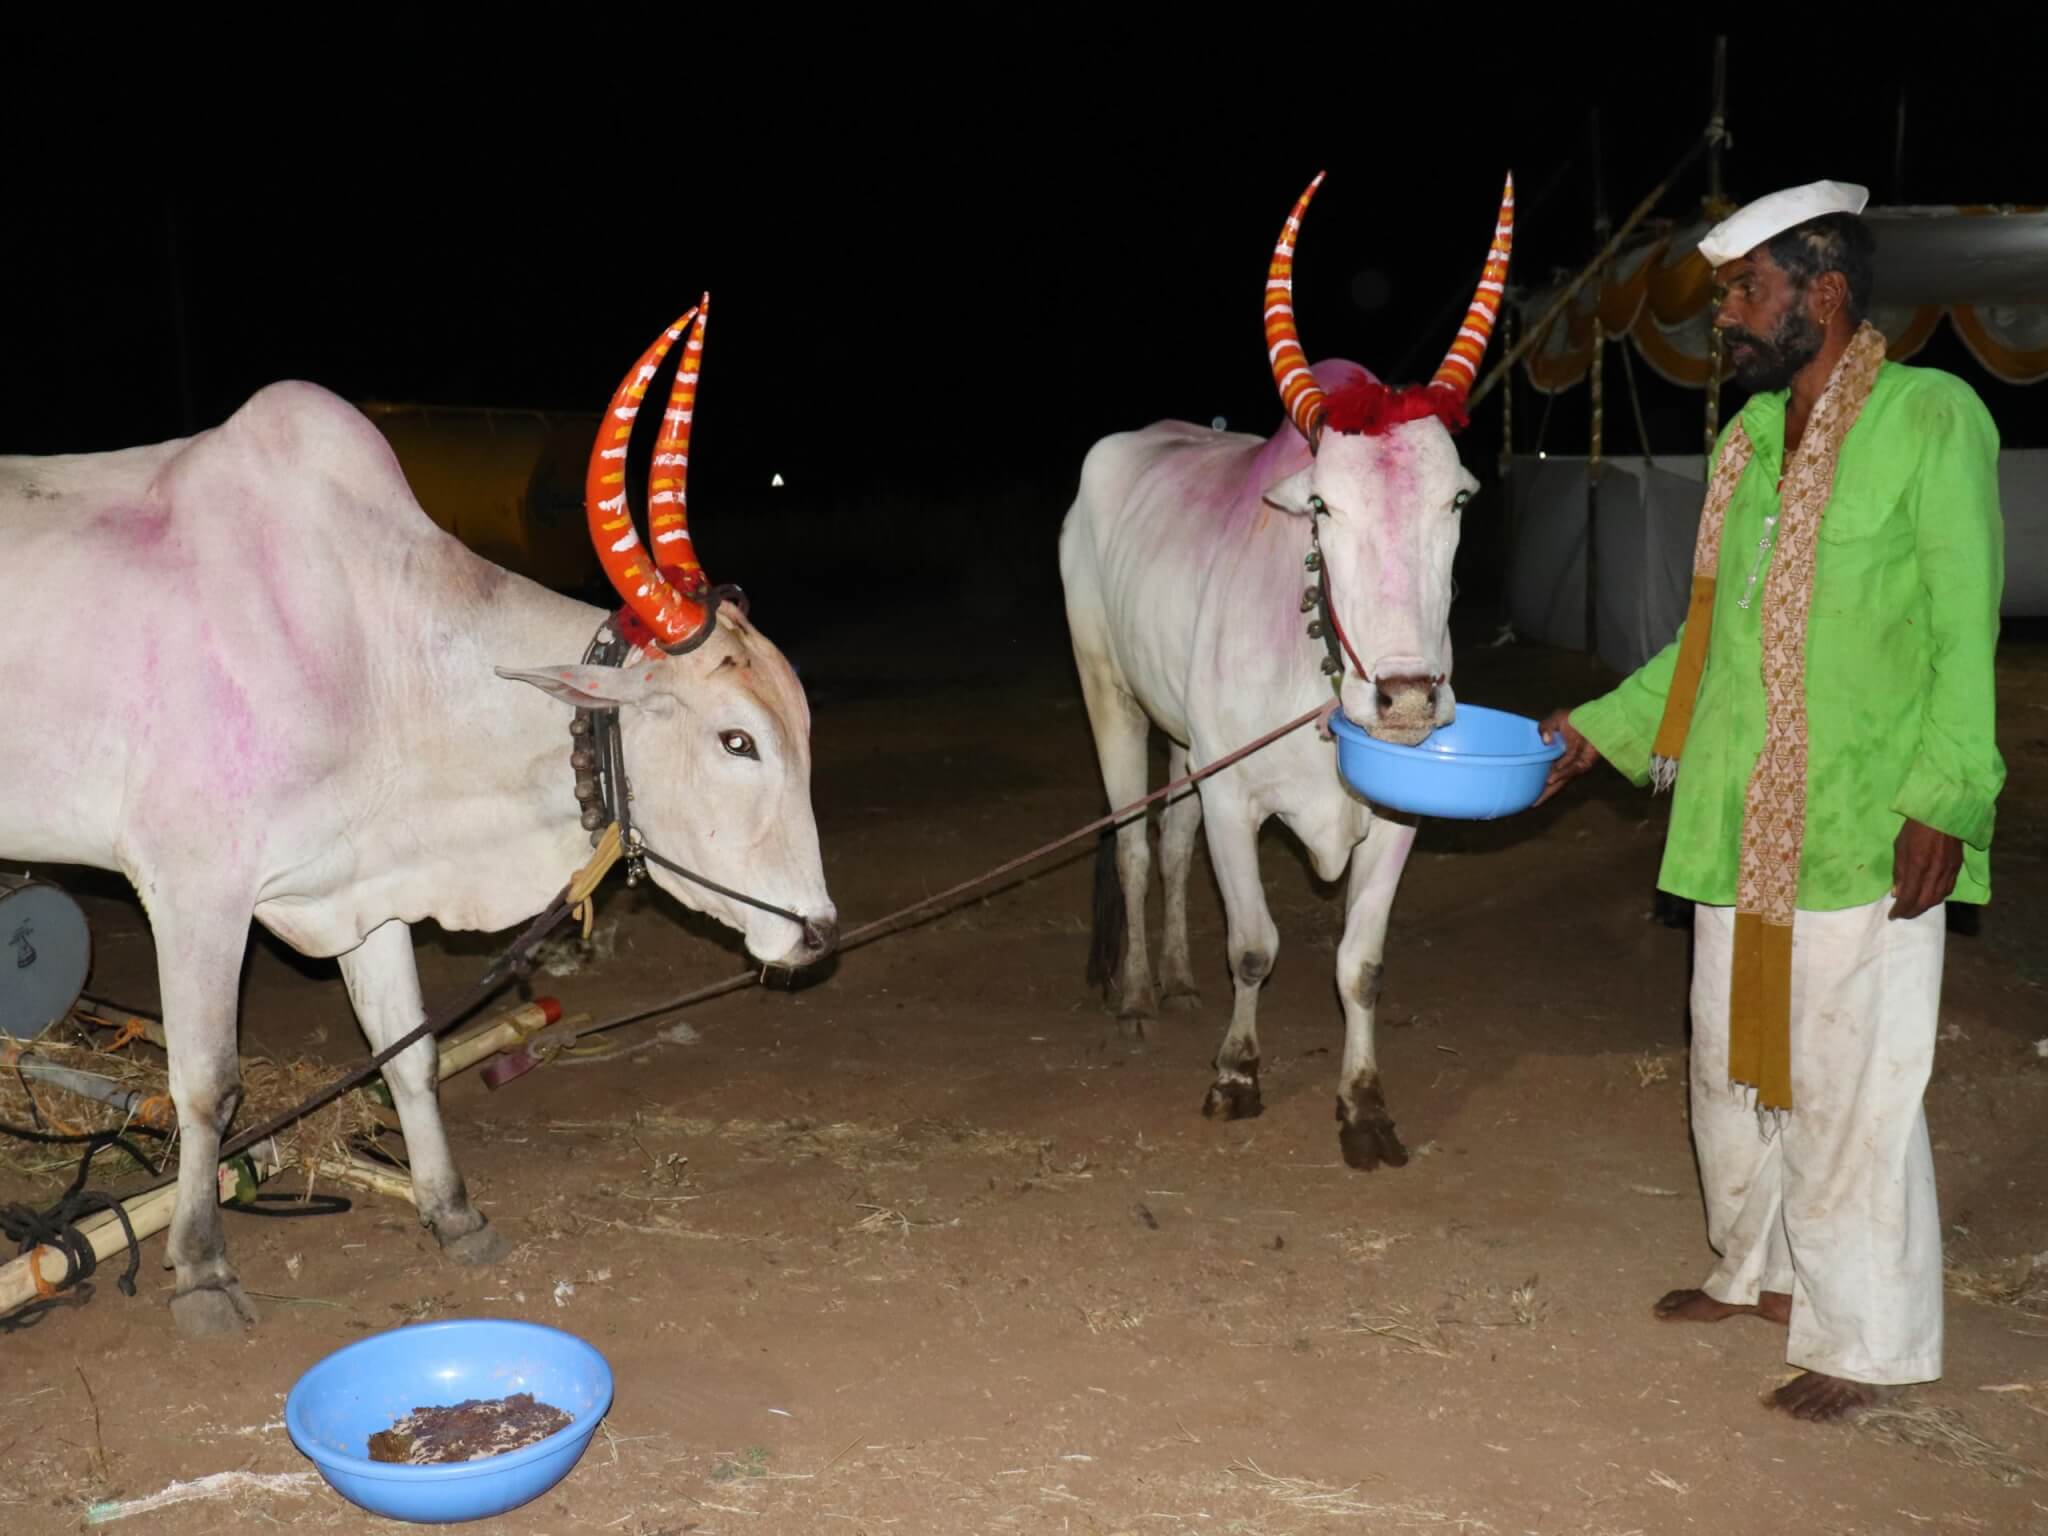 A bullock eats from a bowl held by his owner.